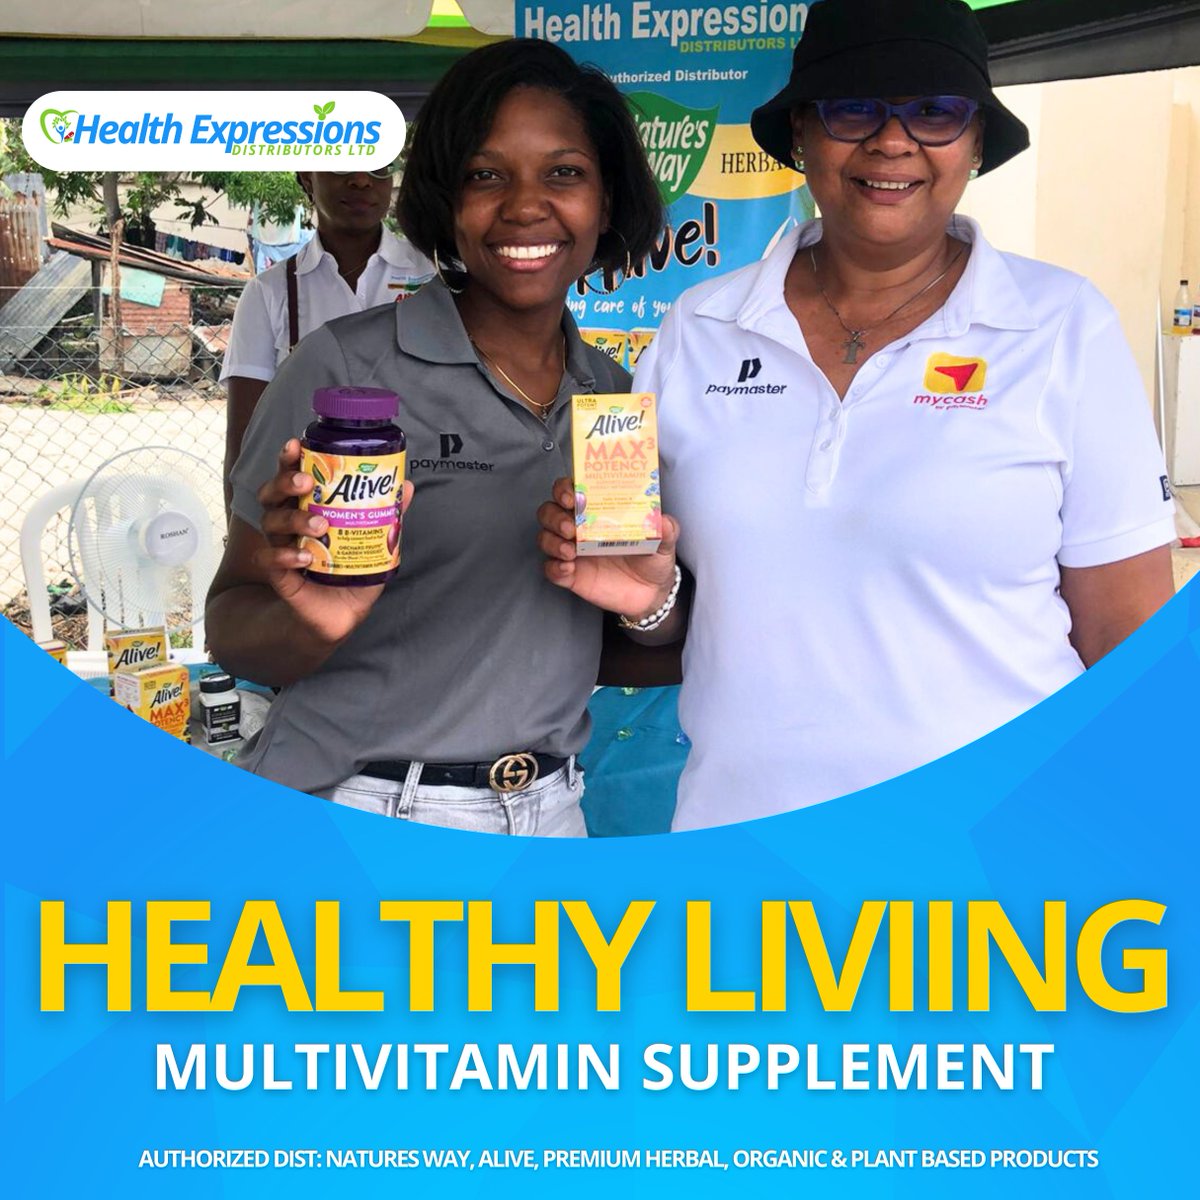 Adding Nature’s Way Alive multivitamins to your diet is an excellent approach to supplying your body with essential nutrients
#naturesway #JamaicaDistributors #pharmacydistributorjamaica #pharmacyinjamaica #Healthexpressions876 #pharmacysupplier #HealthExpressions #Multivitamins